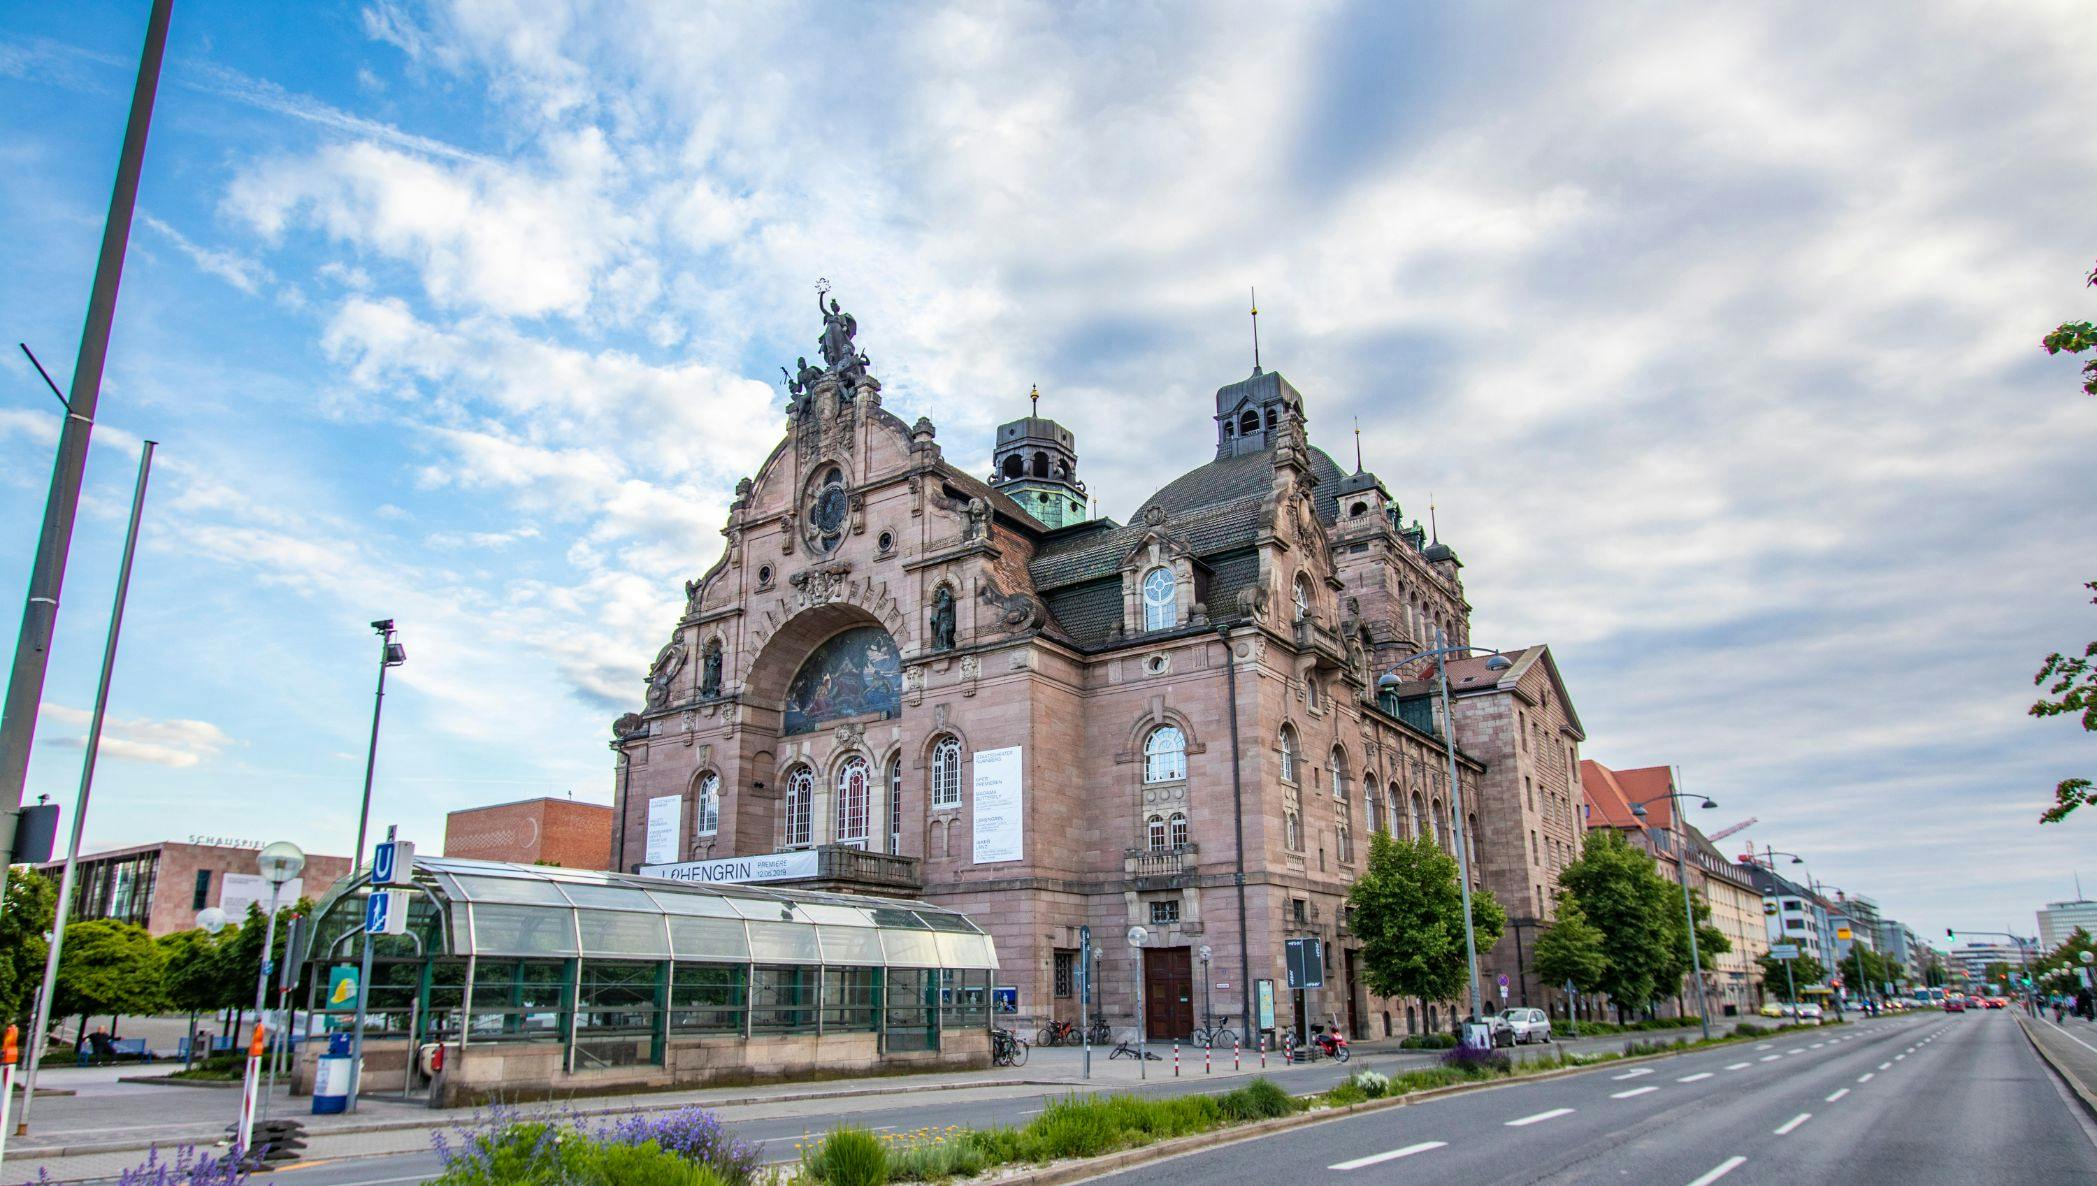 Discover Nuremberg's photogenic places with a local